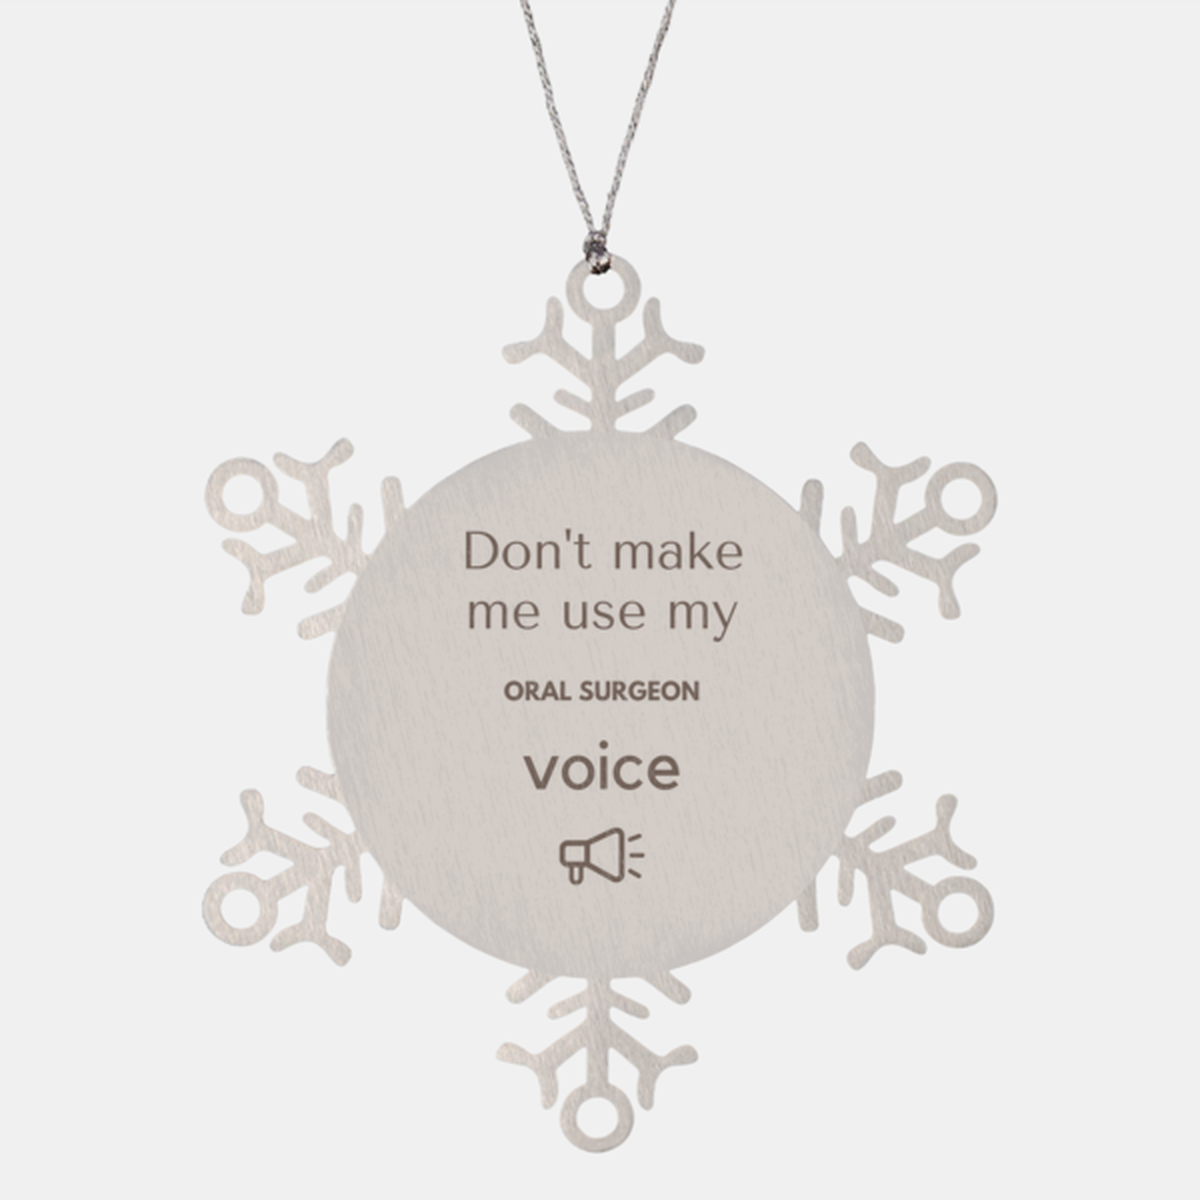 Don't make me use my Oral Surgeon voice, Sarcasm Oral Surgeon Ornament Gifts, Christmas Oral Surgeon Snowflake Ornament Unique Gifts For Oral Surgeon Coworkers, Men, Women, Colleague, Friends